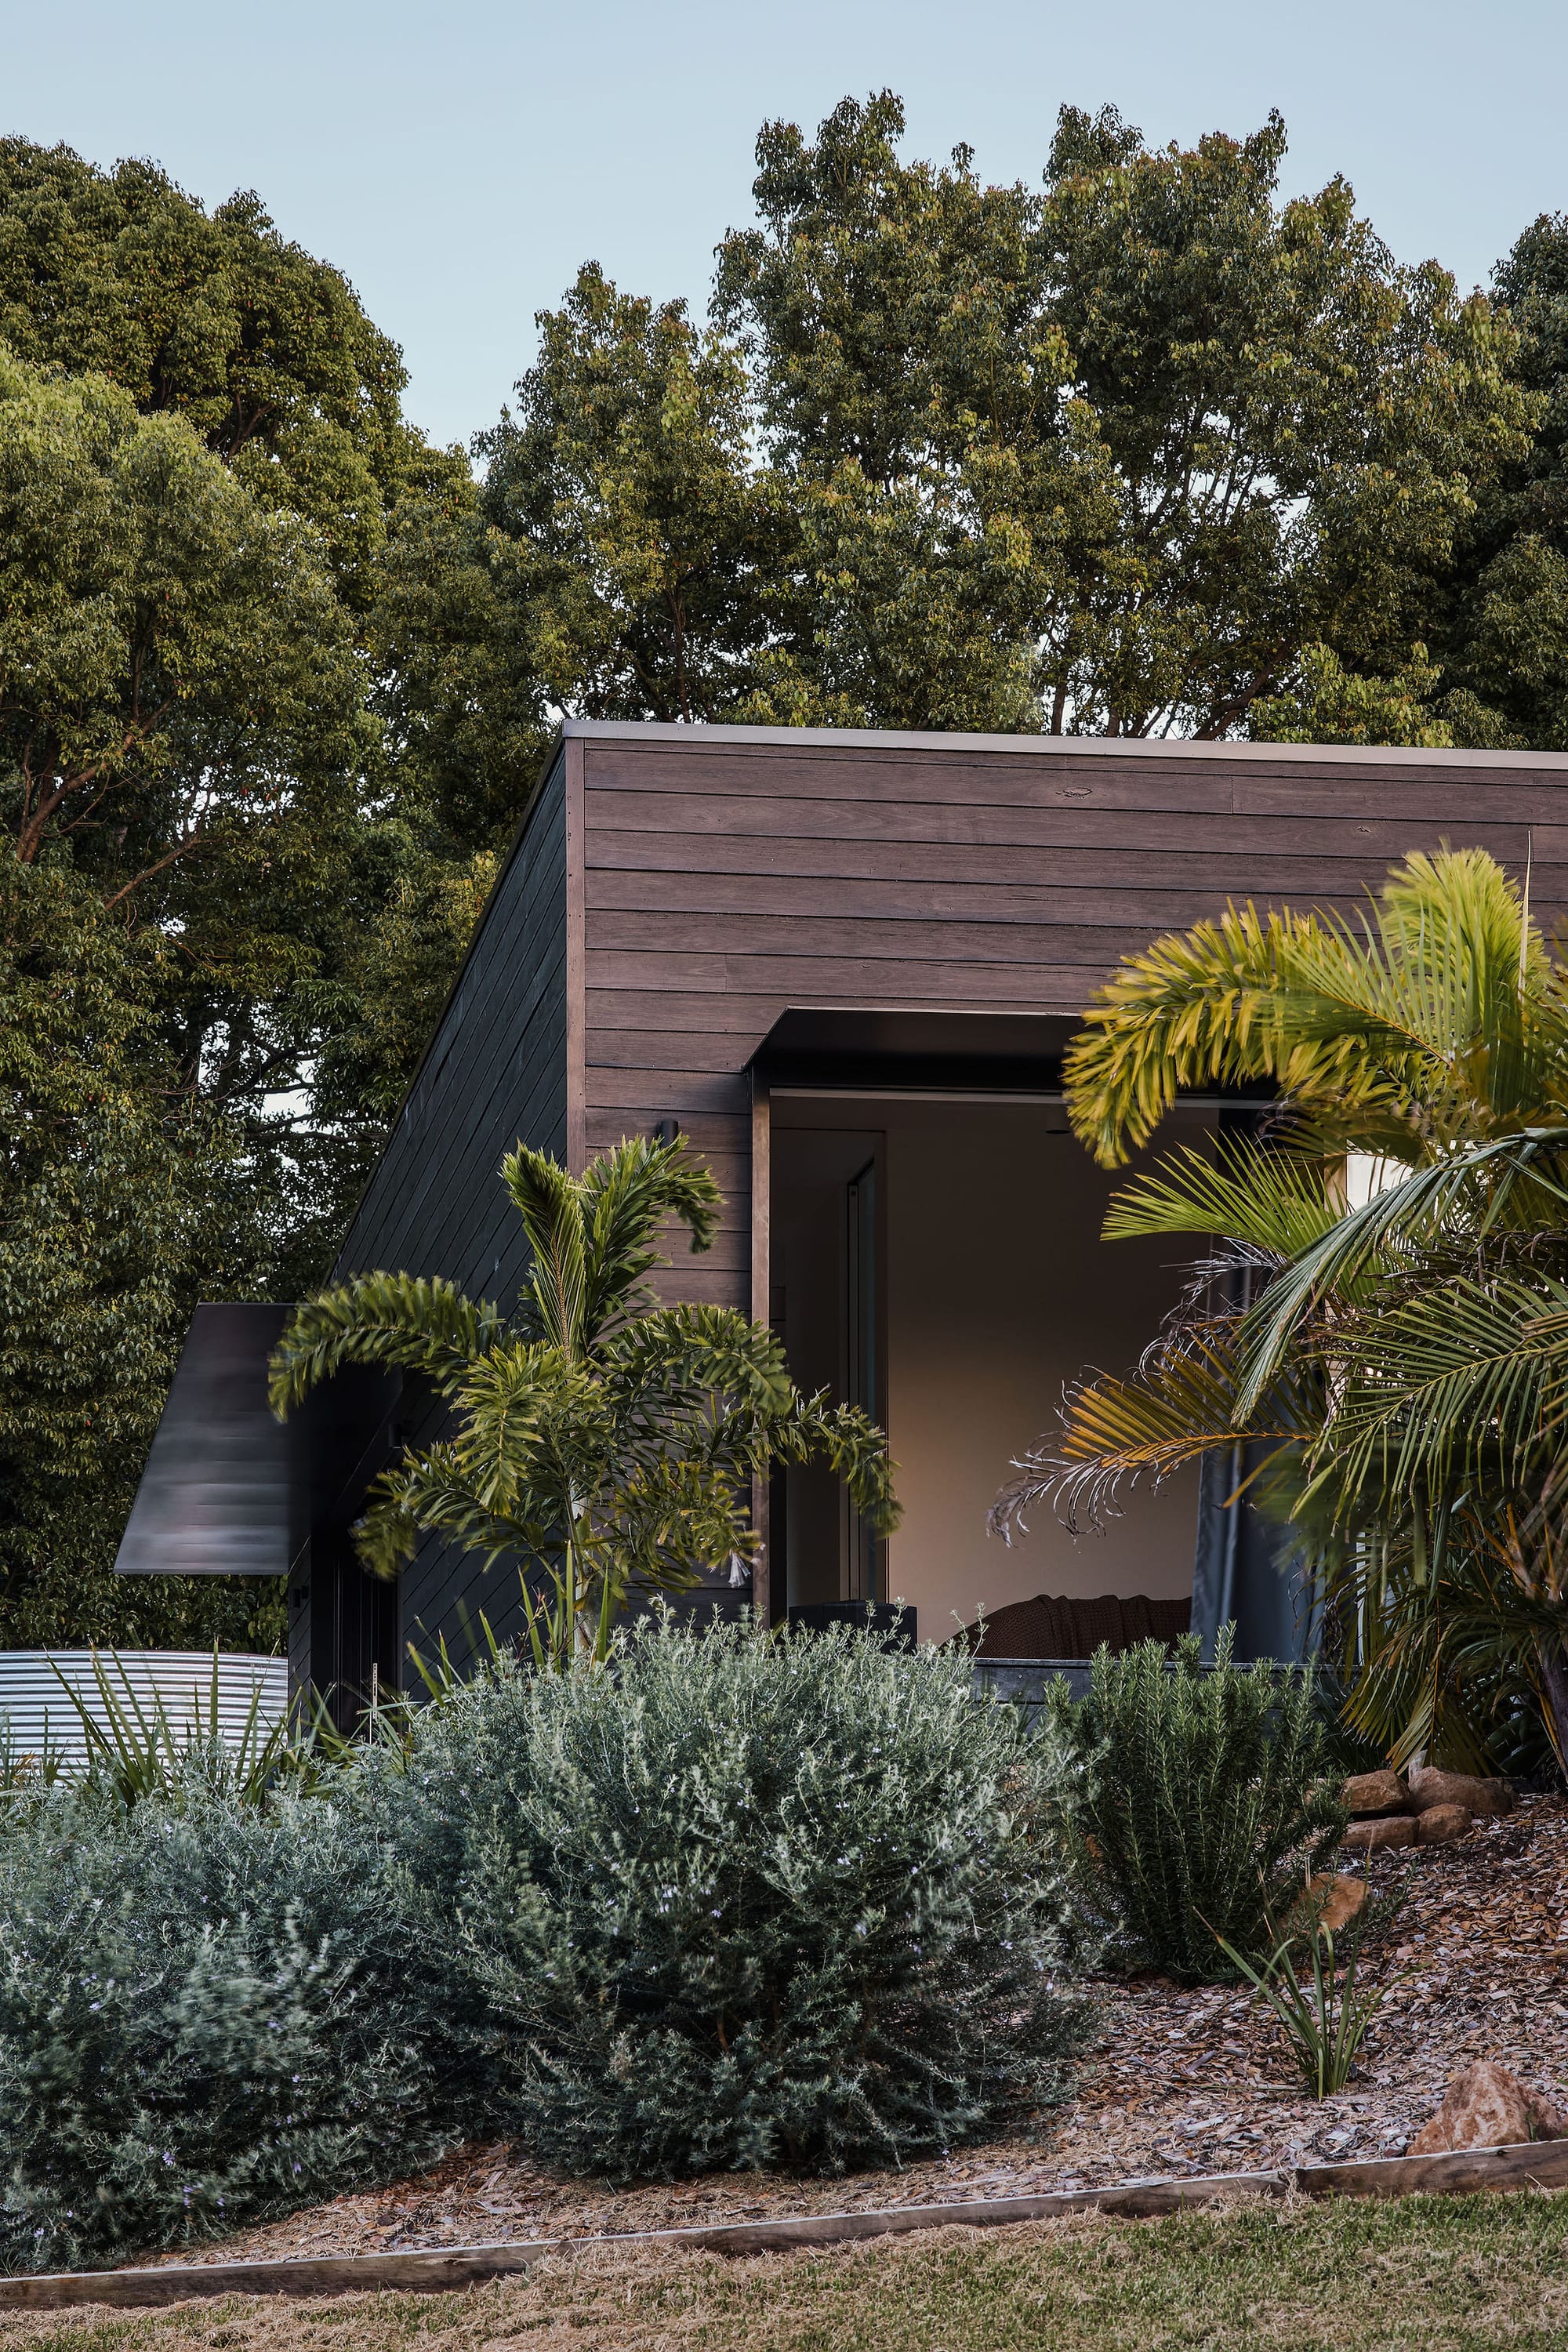 Rockpool Farm Byron Bay. Photography by Andy Macpherson. Timber clad square building with large window openings, hidden behind garden beg with tall trees and plants.